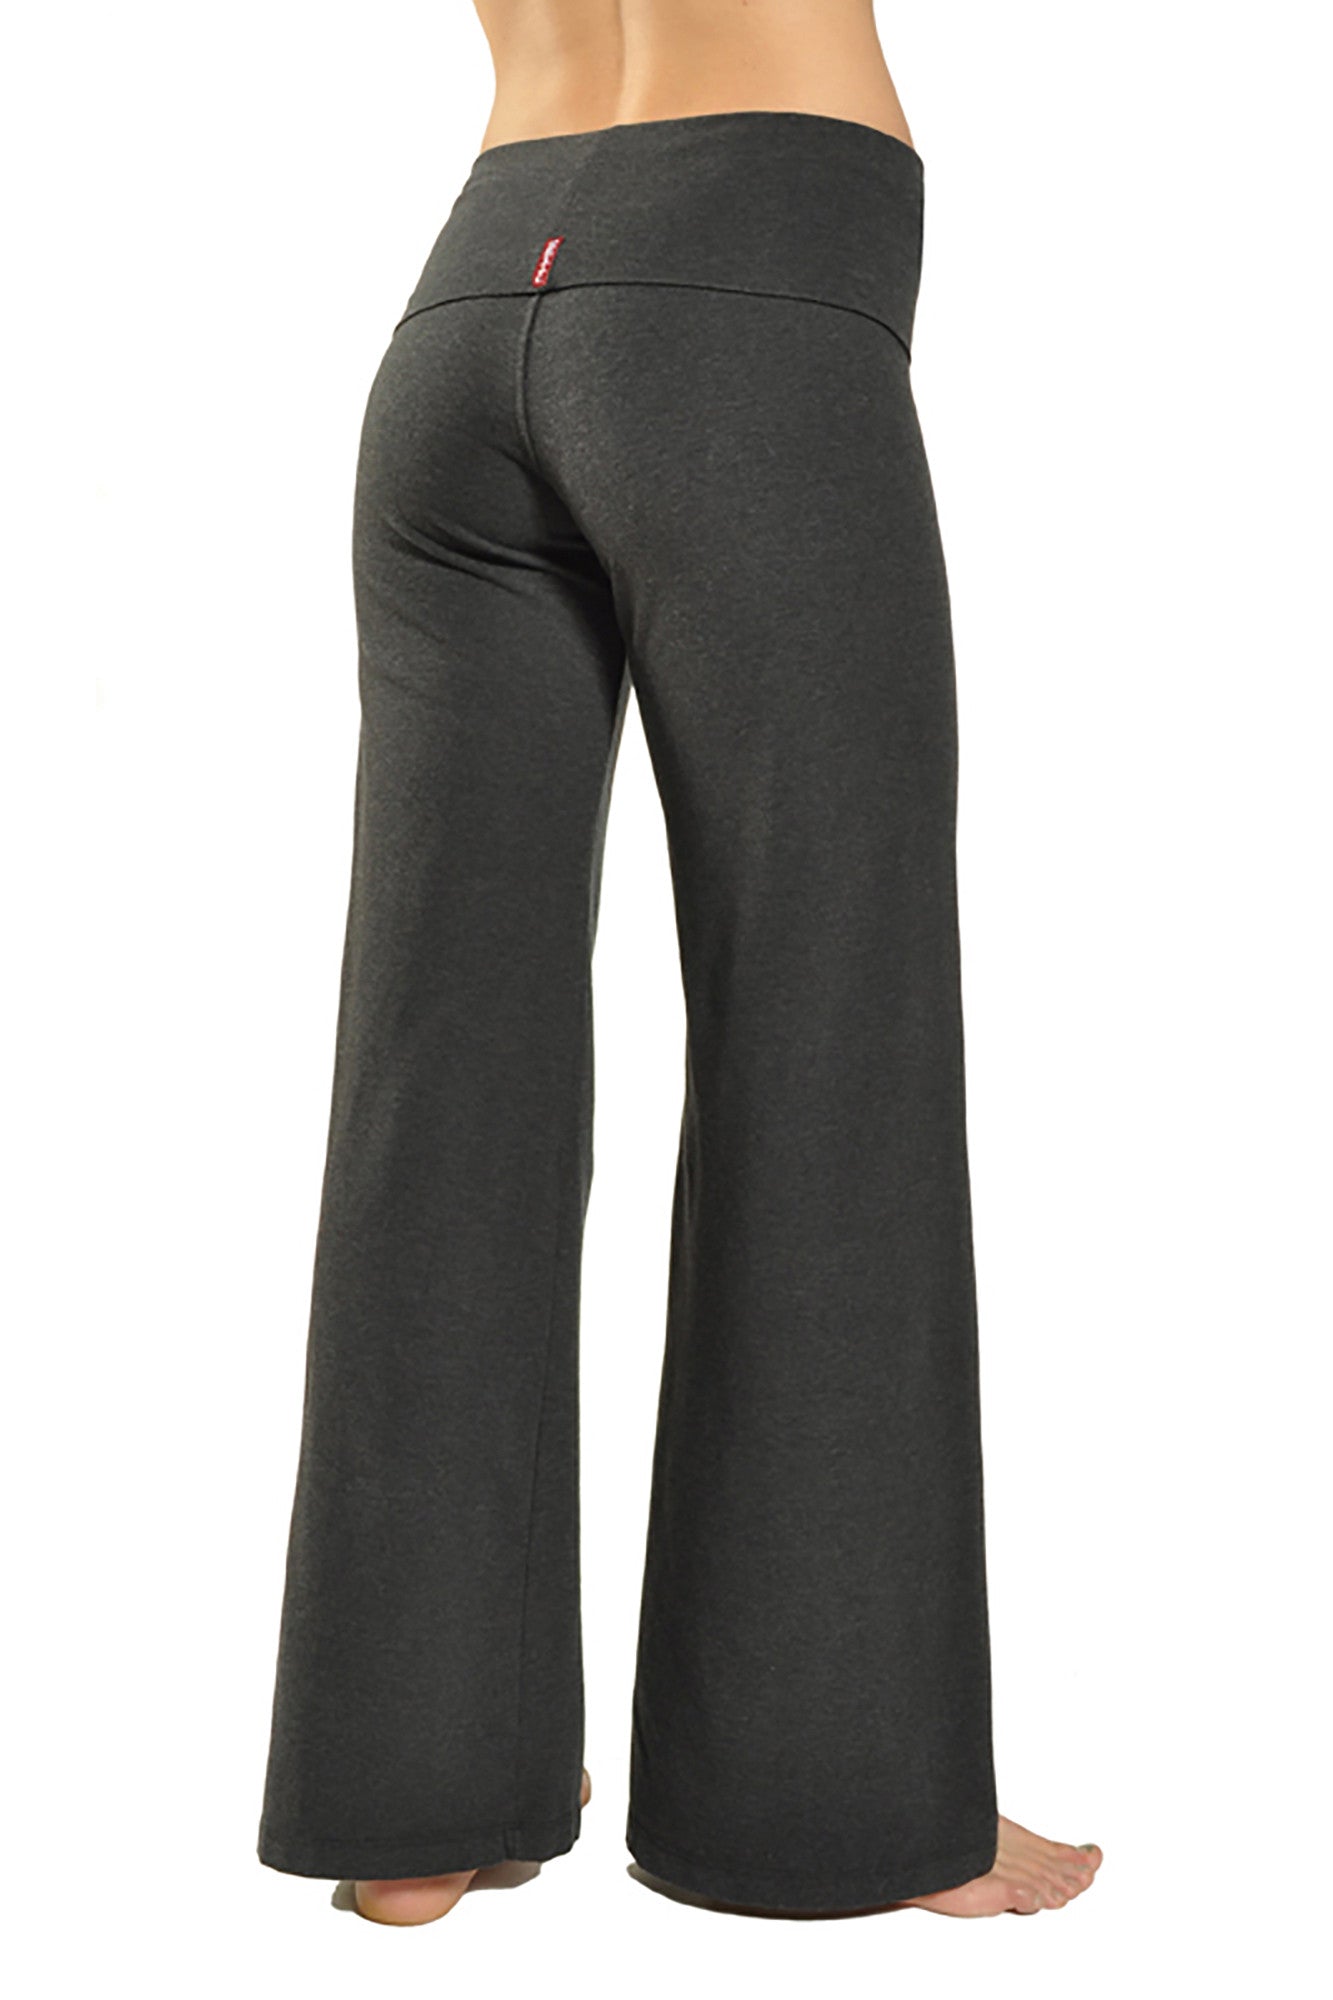 Wide Leg Roll Down Pants (Style W-326, Dark Charcoal) by Hard Tail For -  Londo Lifestyle